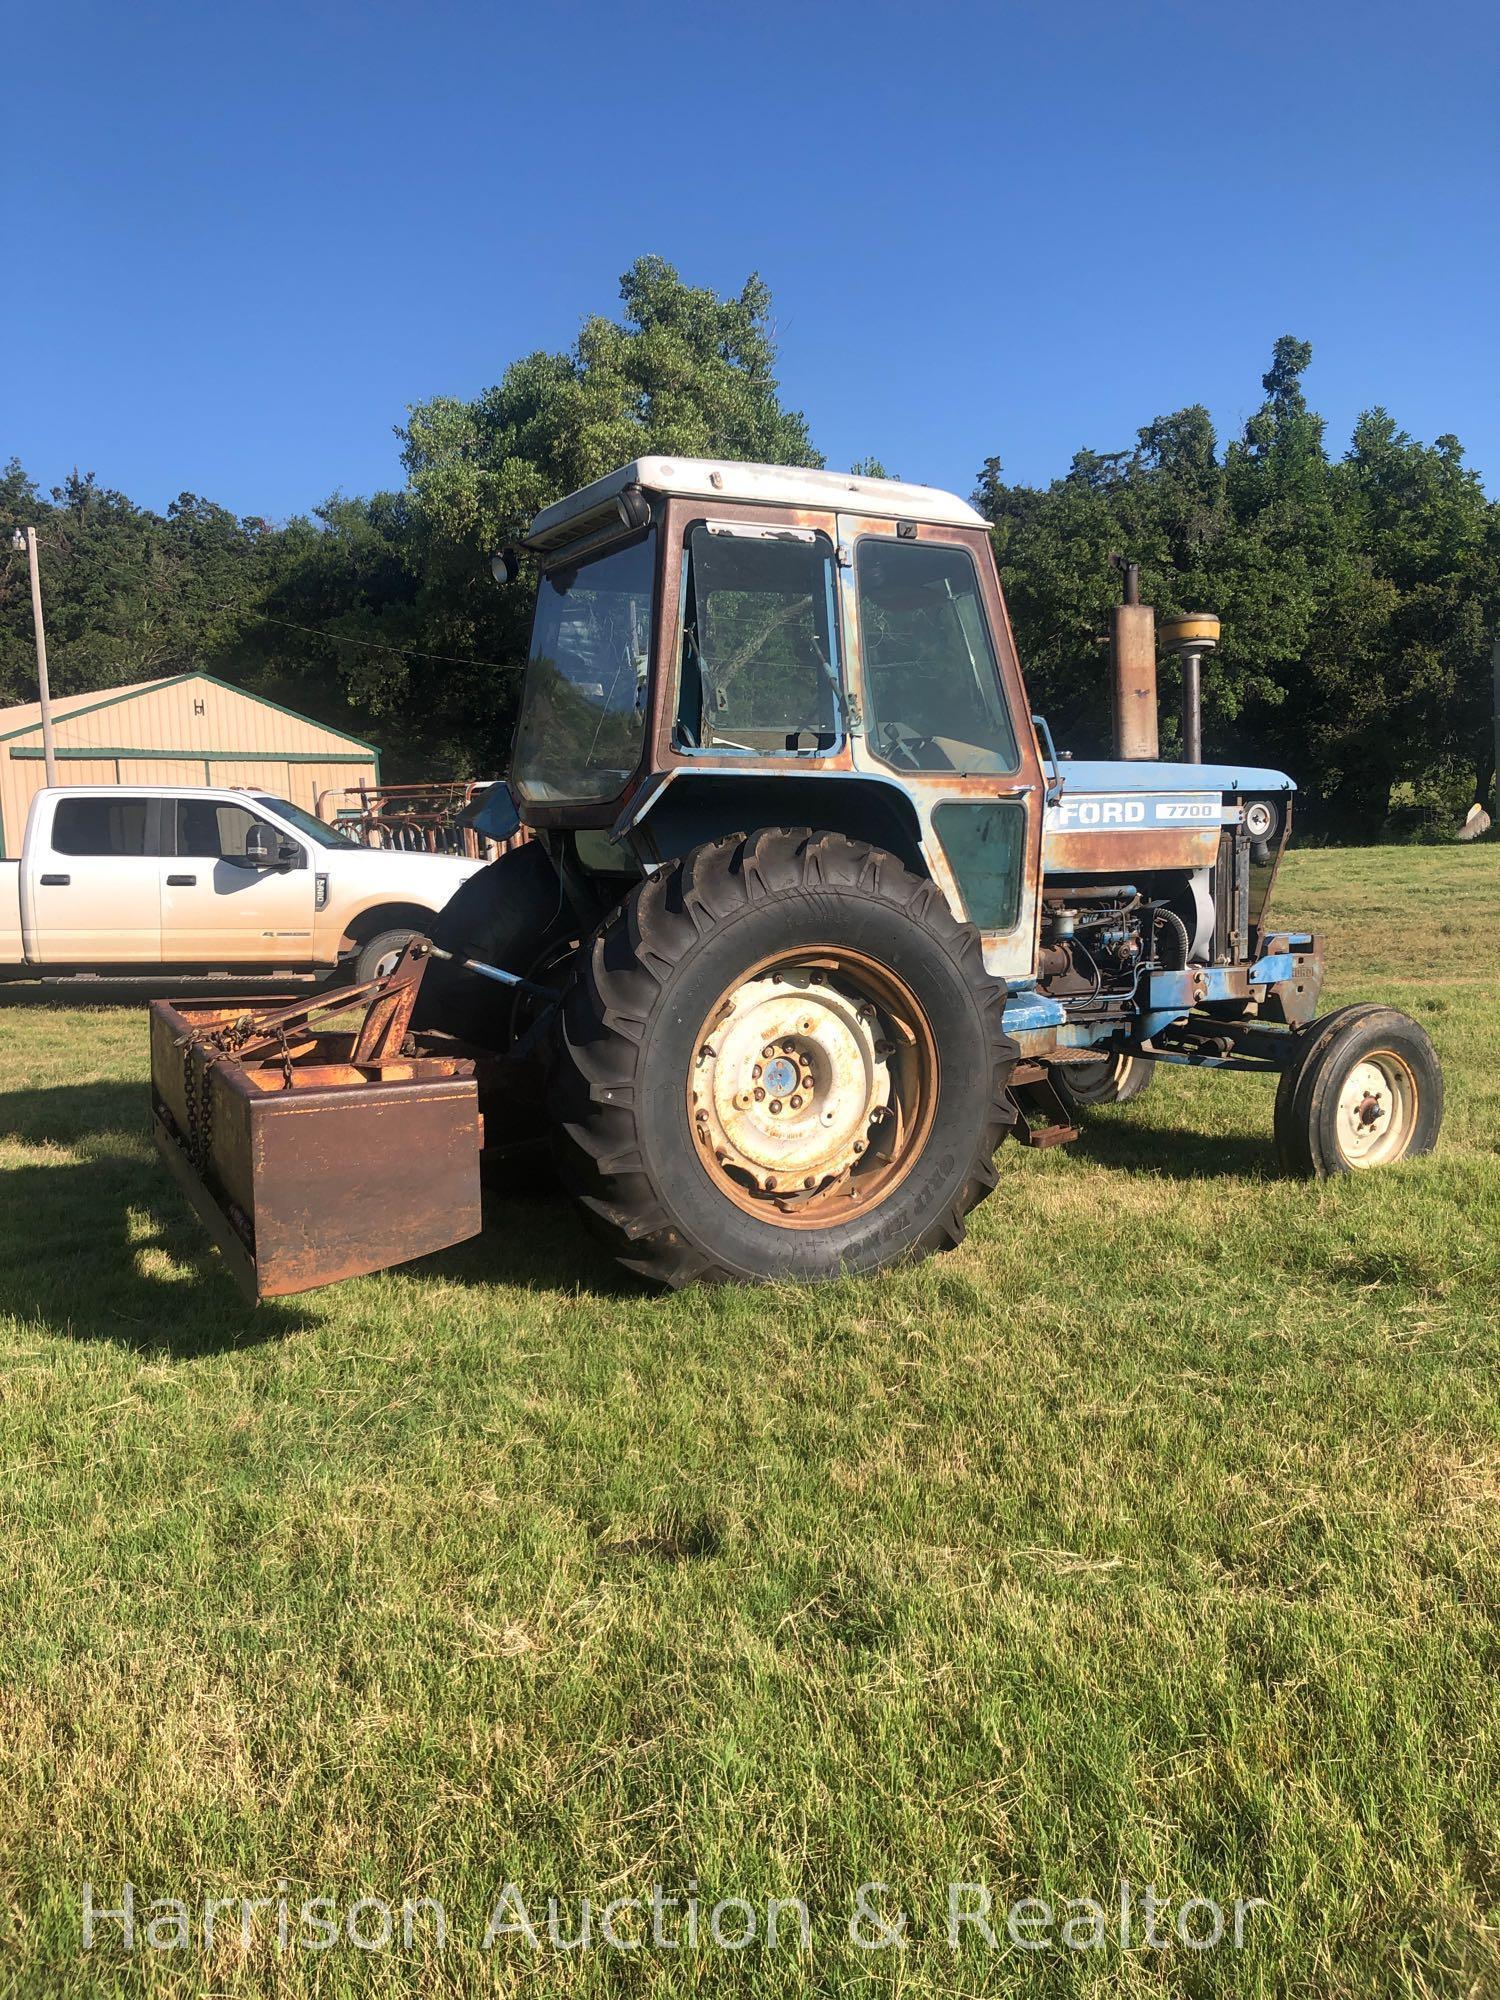 1976 7700 Ford tractor